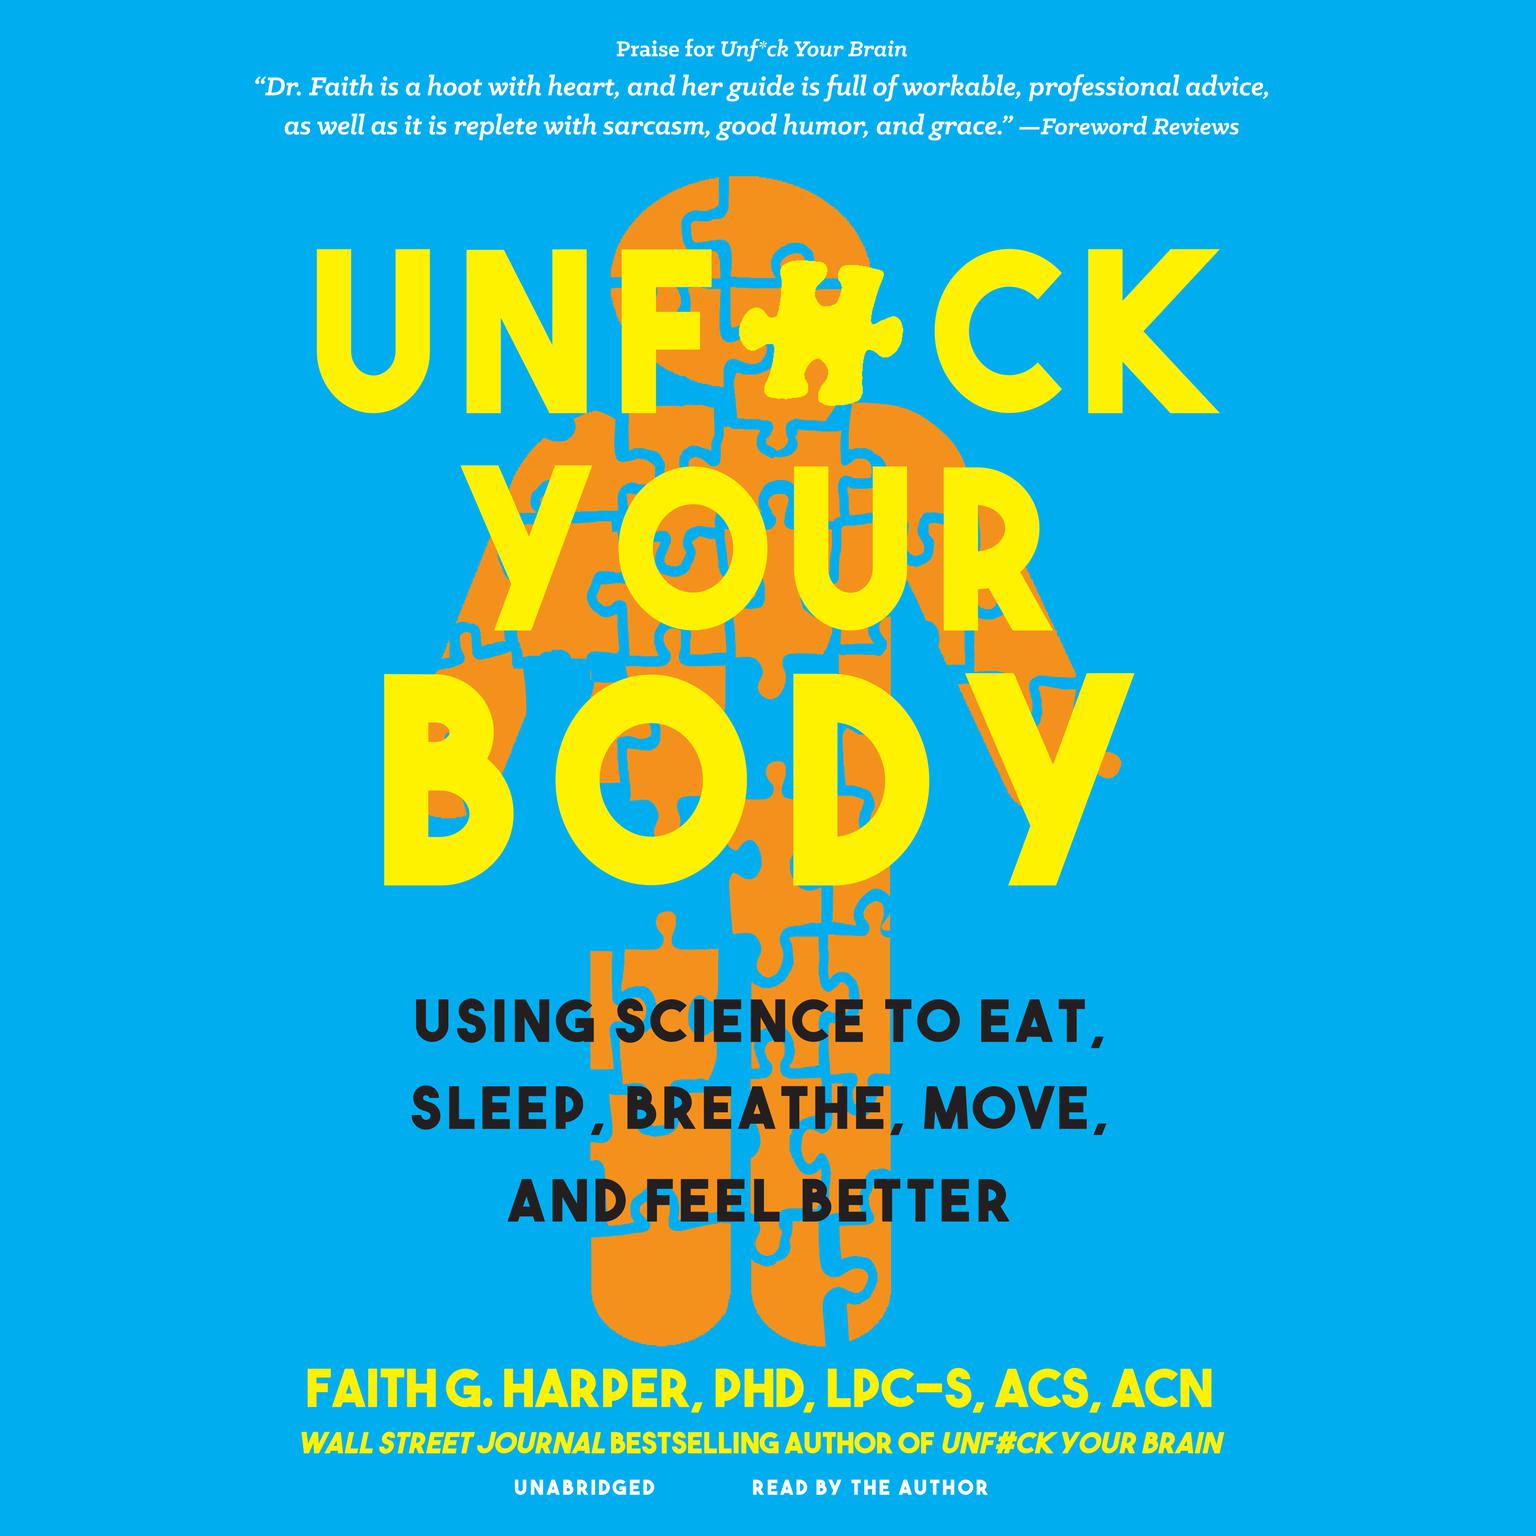 Unf*ck Your Body: Using Science to Eat, Sleep, Breathe, Move, and Feel Better Audiobook, by Faith G. Harper